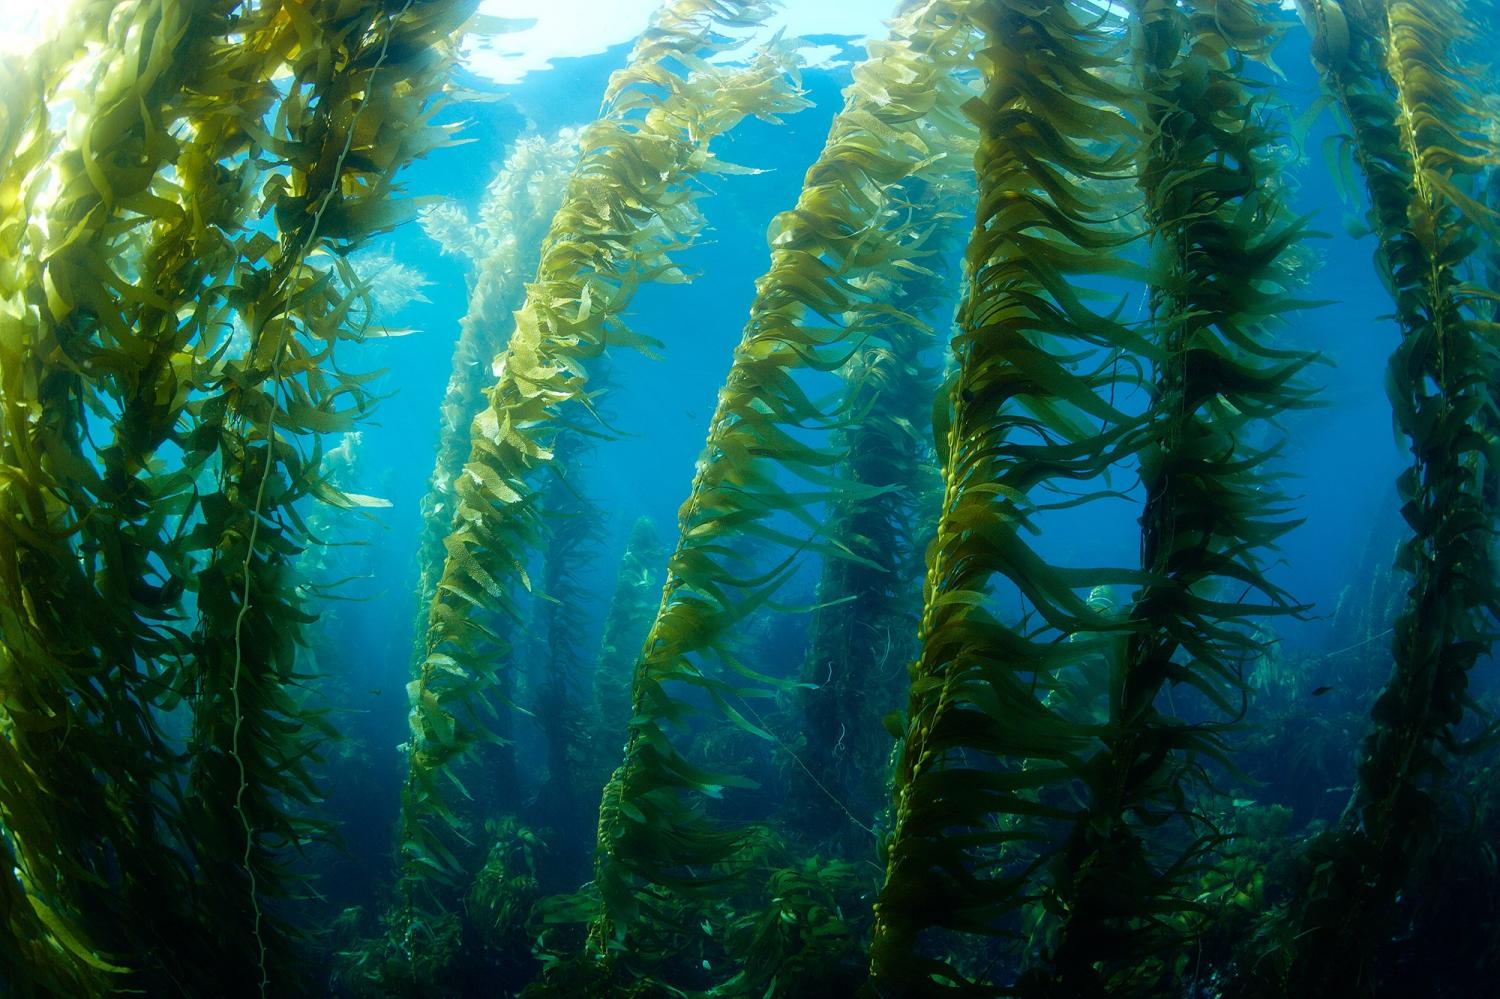 Growing kelp for biofuel: Researchers aim to harness potential